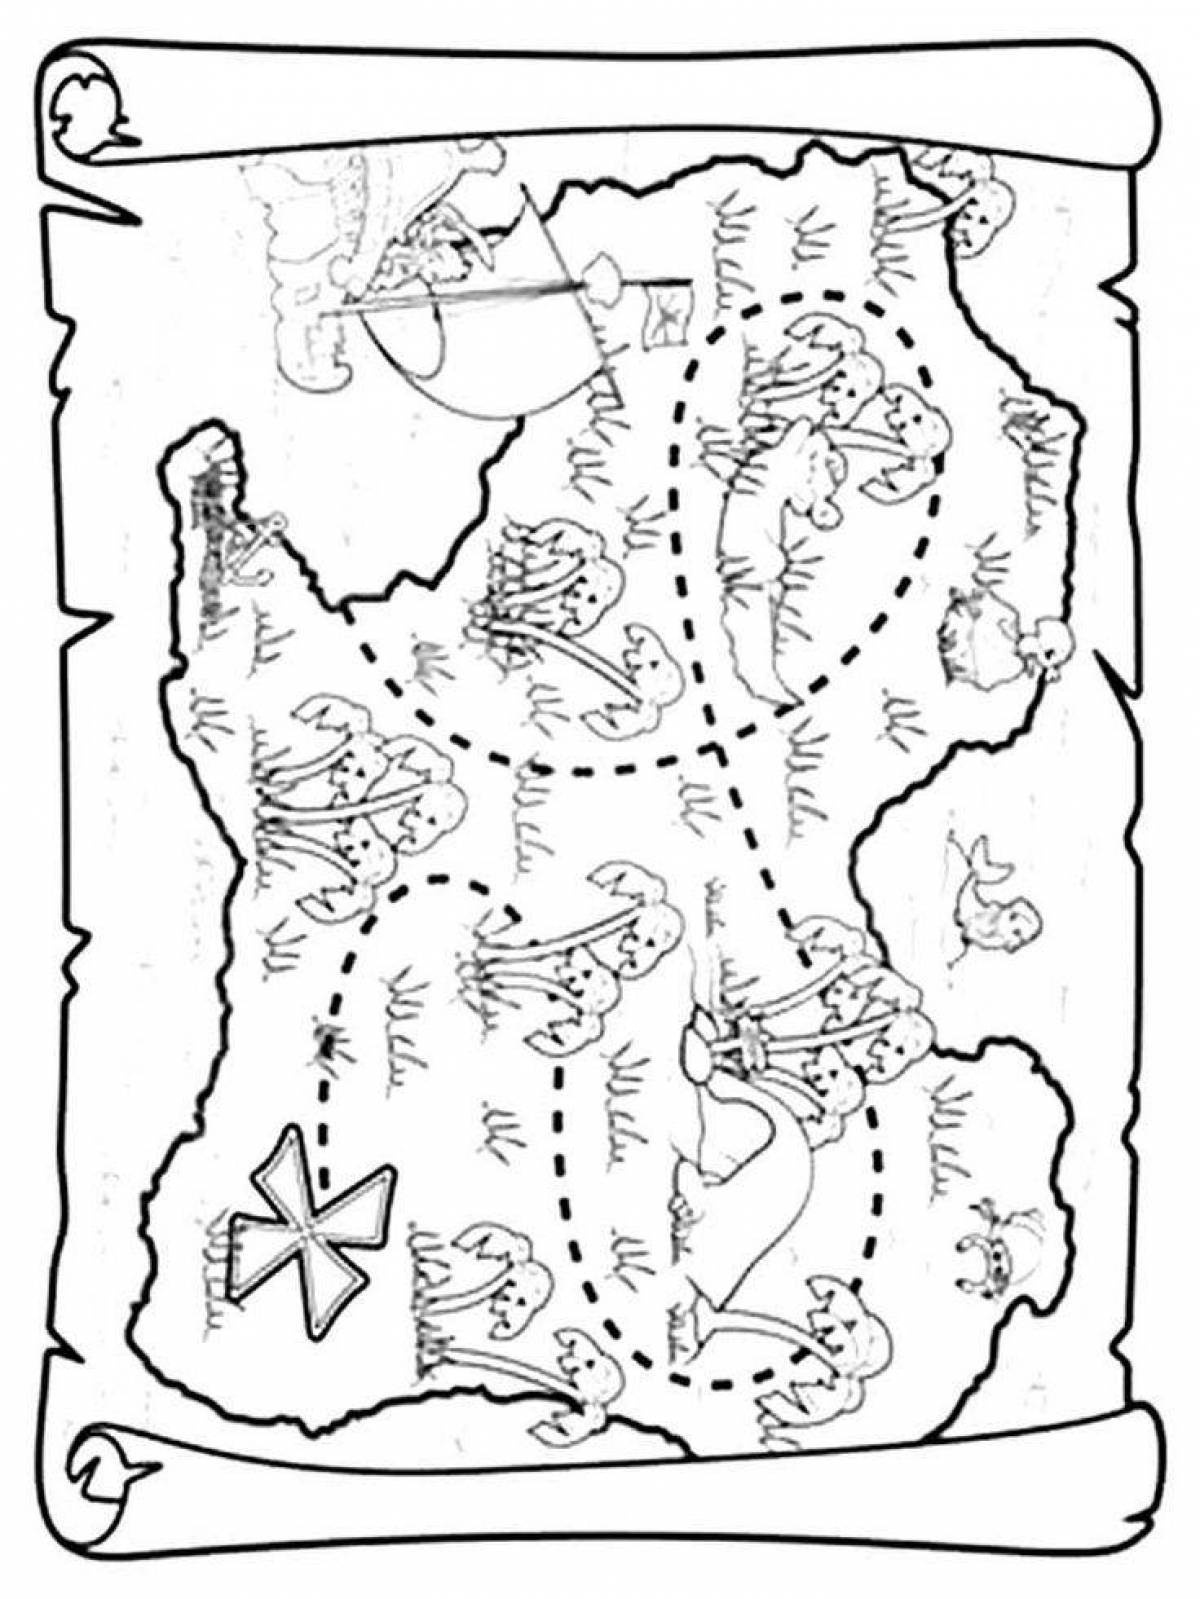 Fun coloring page map